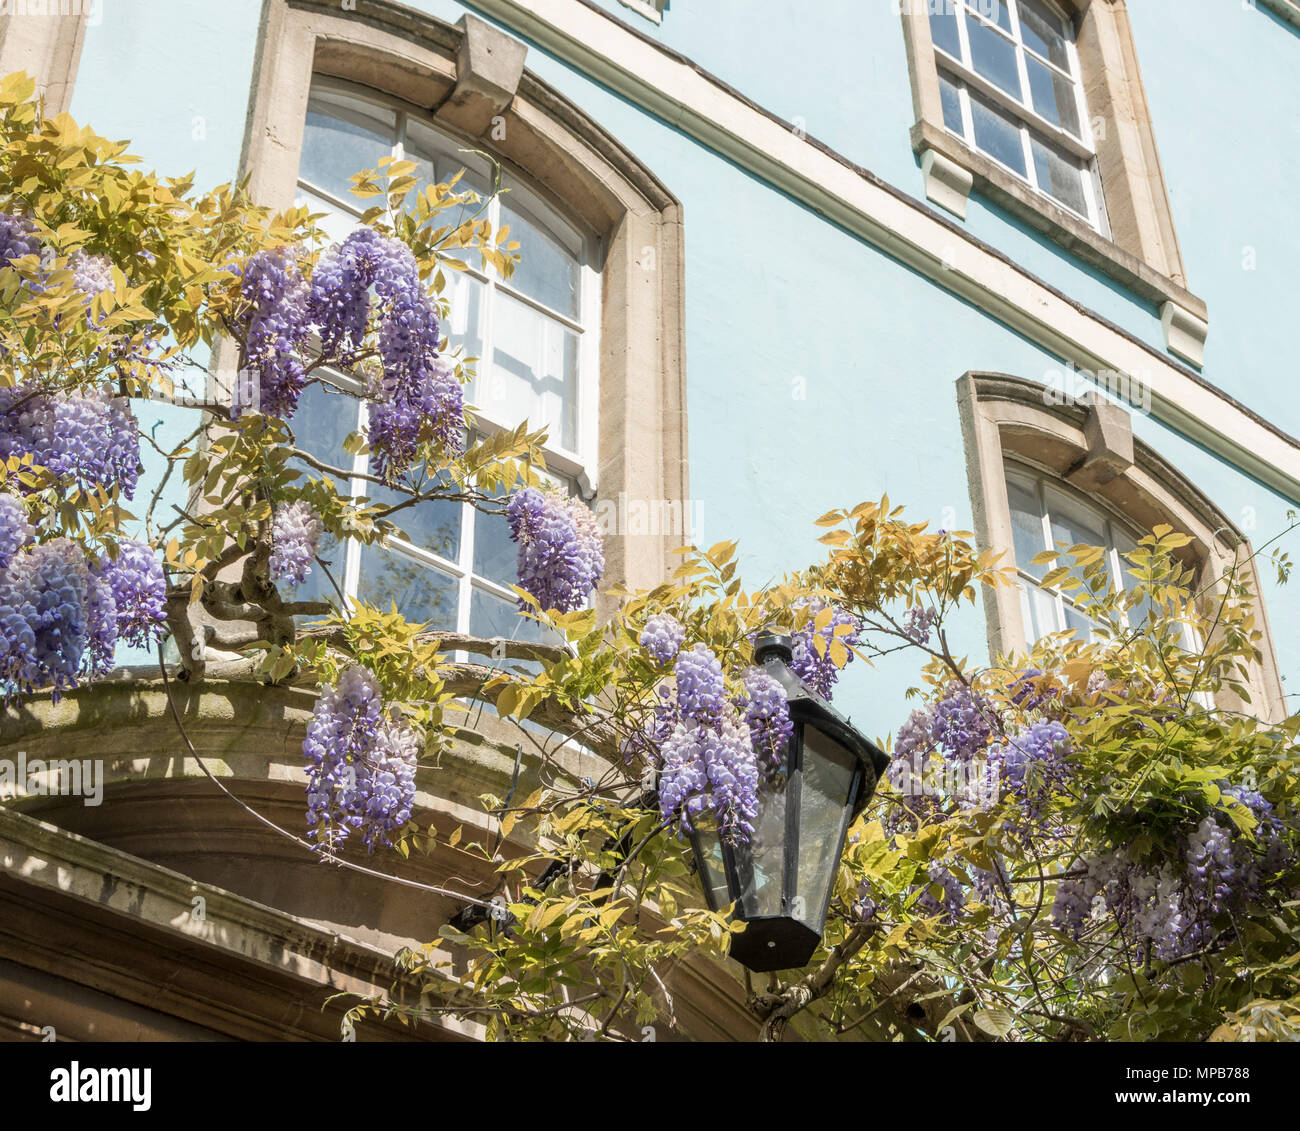 Wisteria climbing over the front of a blue painted house in Dowry Square, Bristol Stock Photo